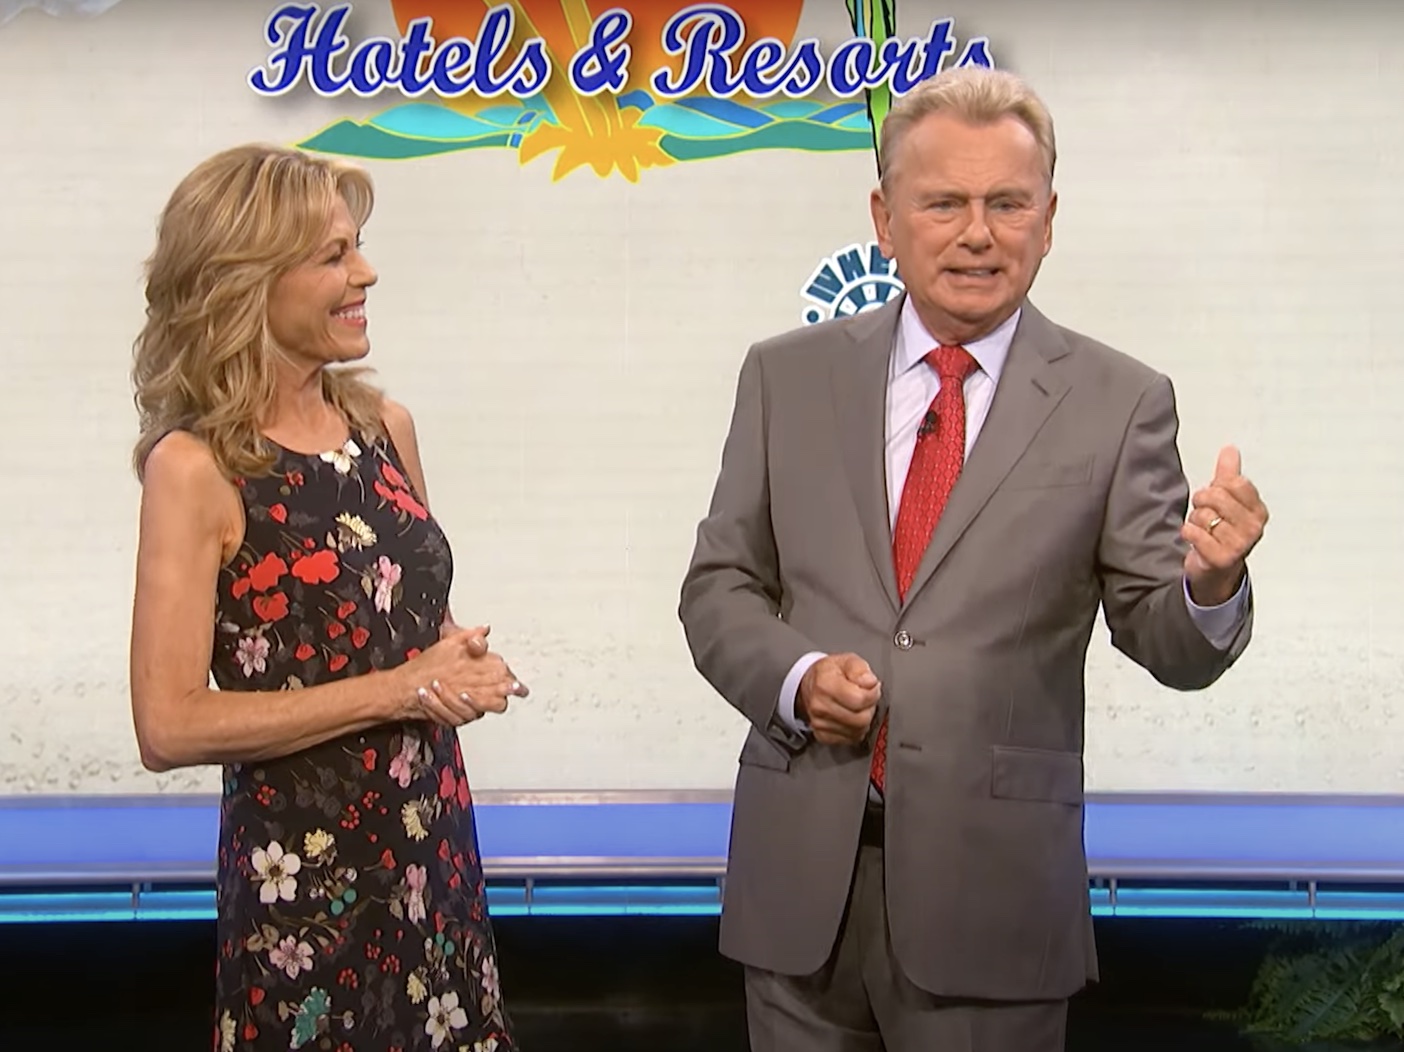 Show Gossip: Vanna White Supposedly Ready to Quit ‘Wheel Of Fortune’Pat Sajak